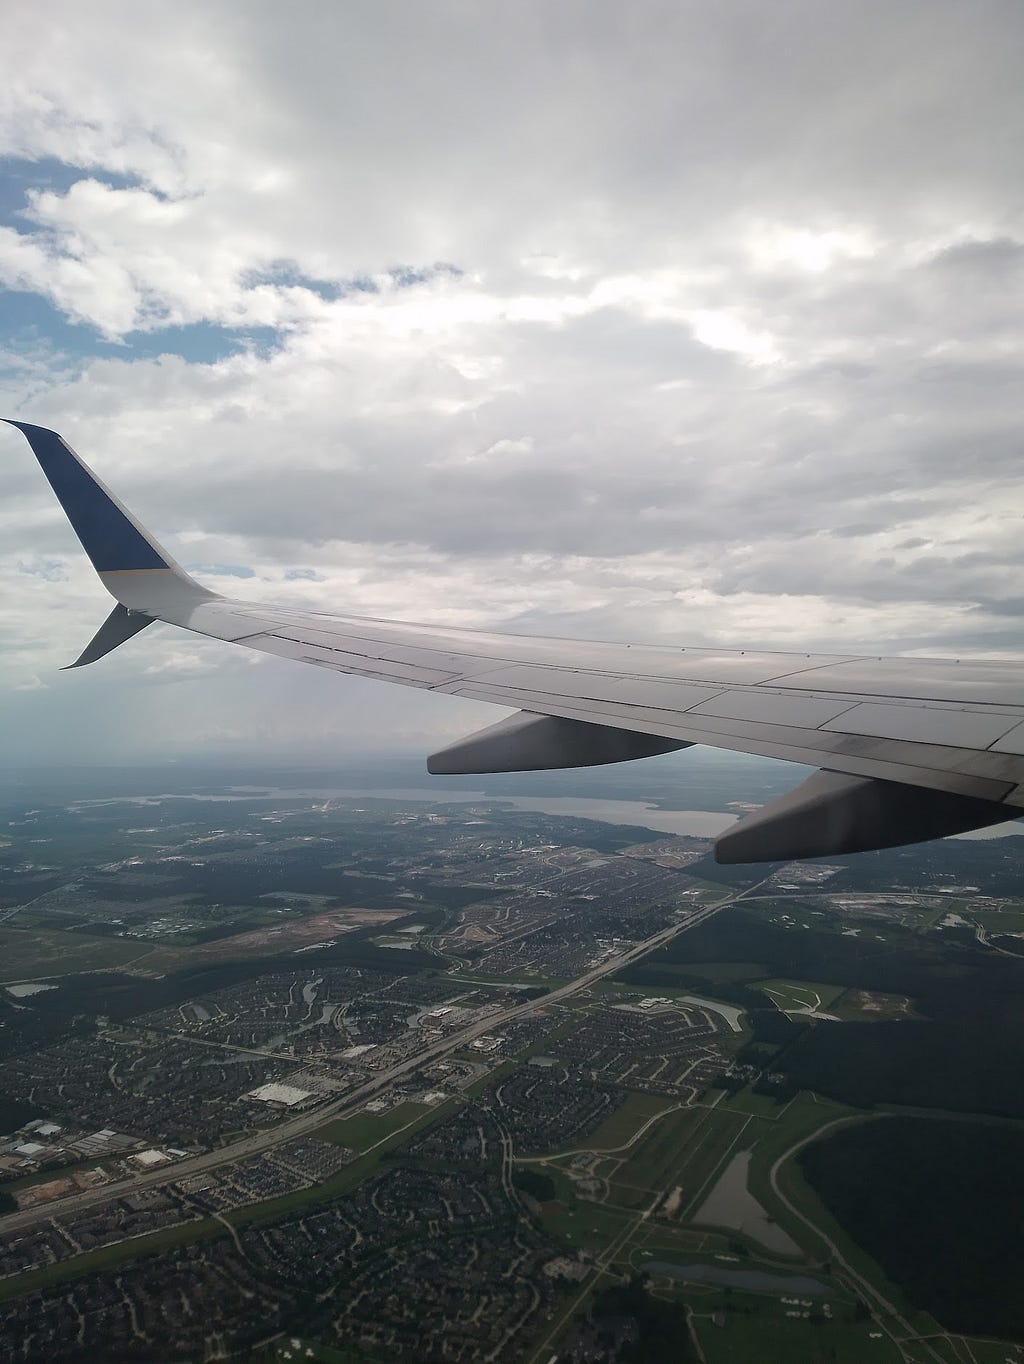 Wing shot, featuring Houston, Texas below — from the flight I almost missed